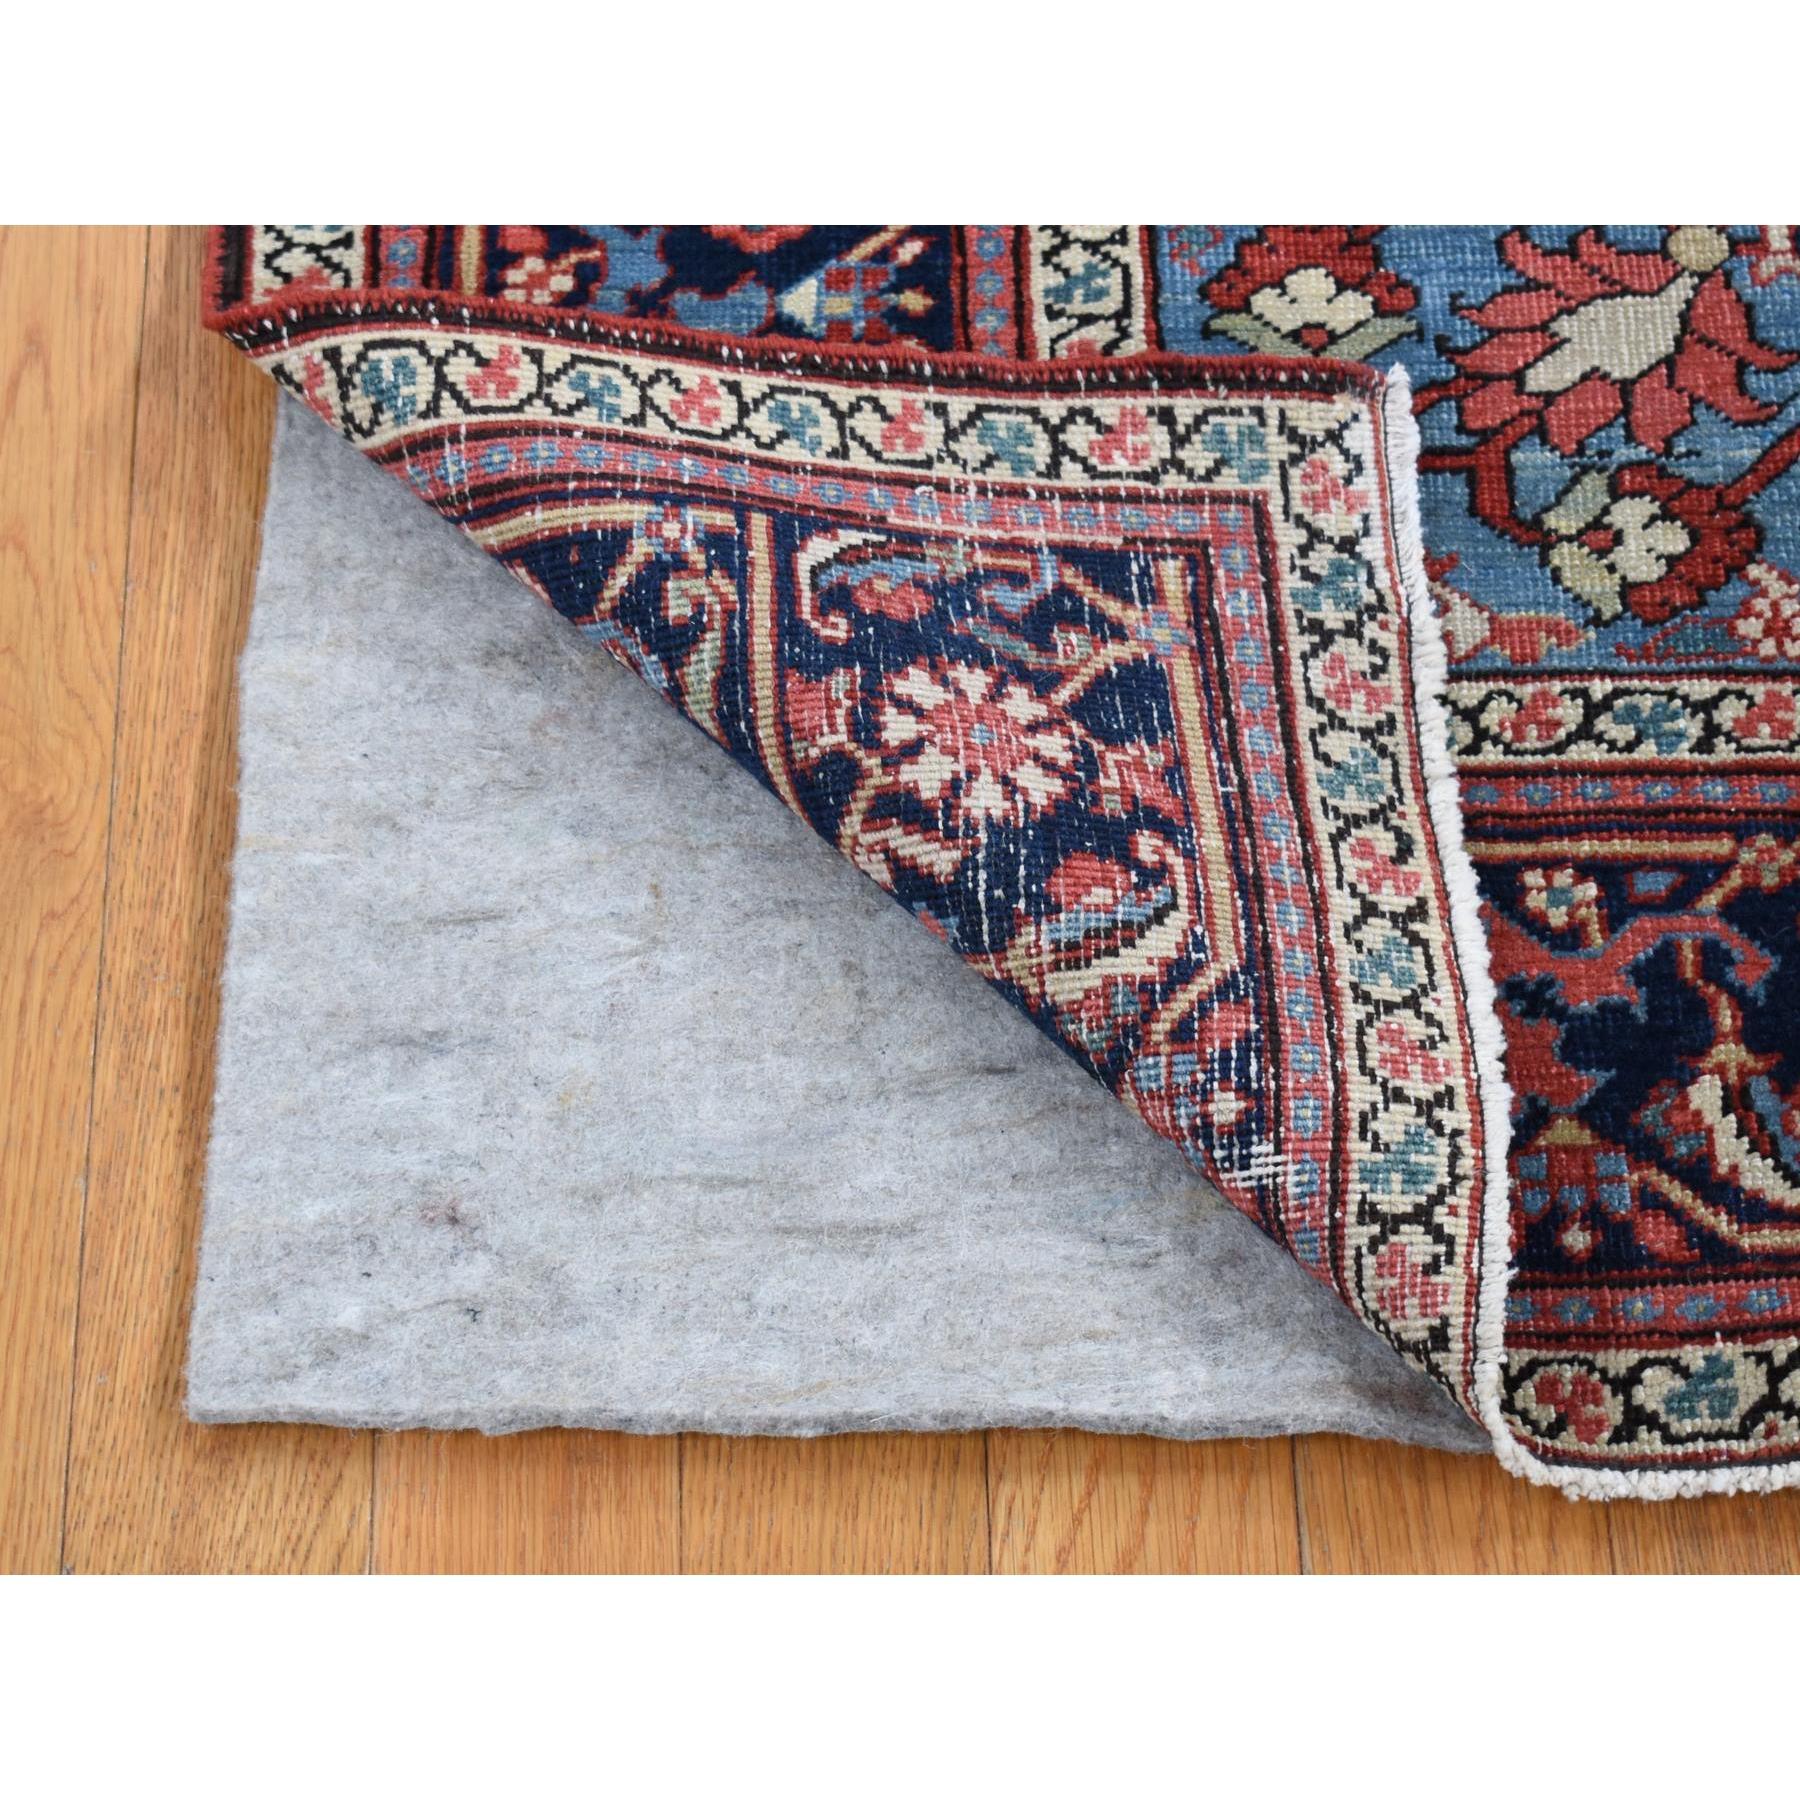 This fabulous hand-knotted carpet has been created and designed for extra strength and durability. This rug has been handcrafted for weeks in the traditional method that is used to make exact rug size in feet and inches : 4'9